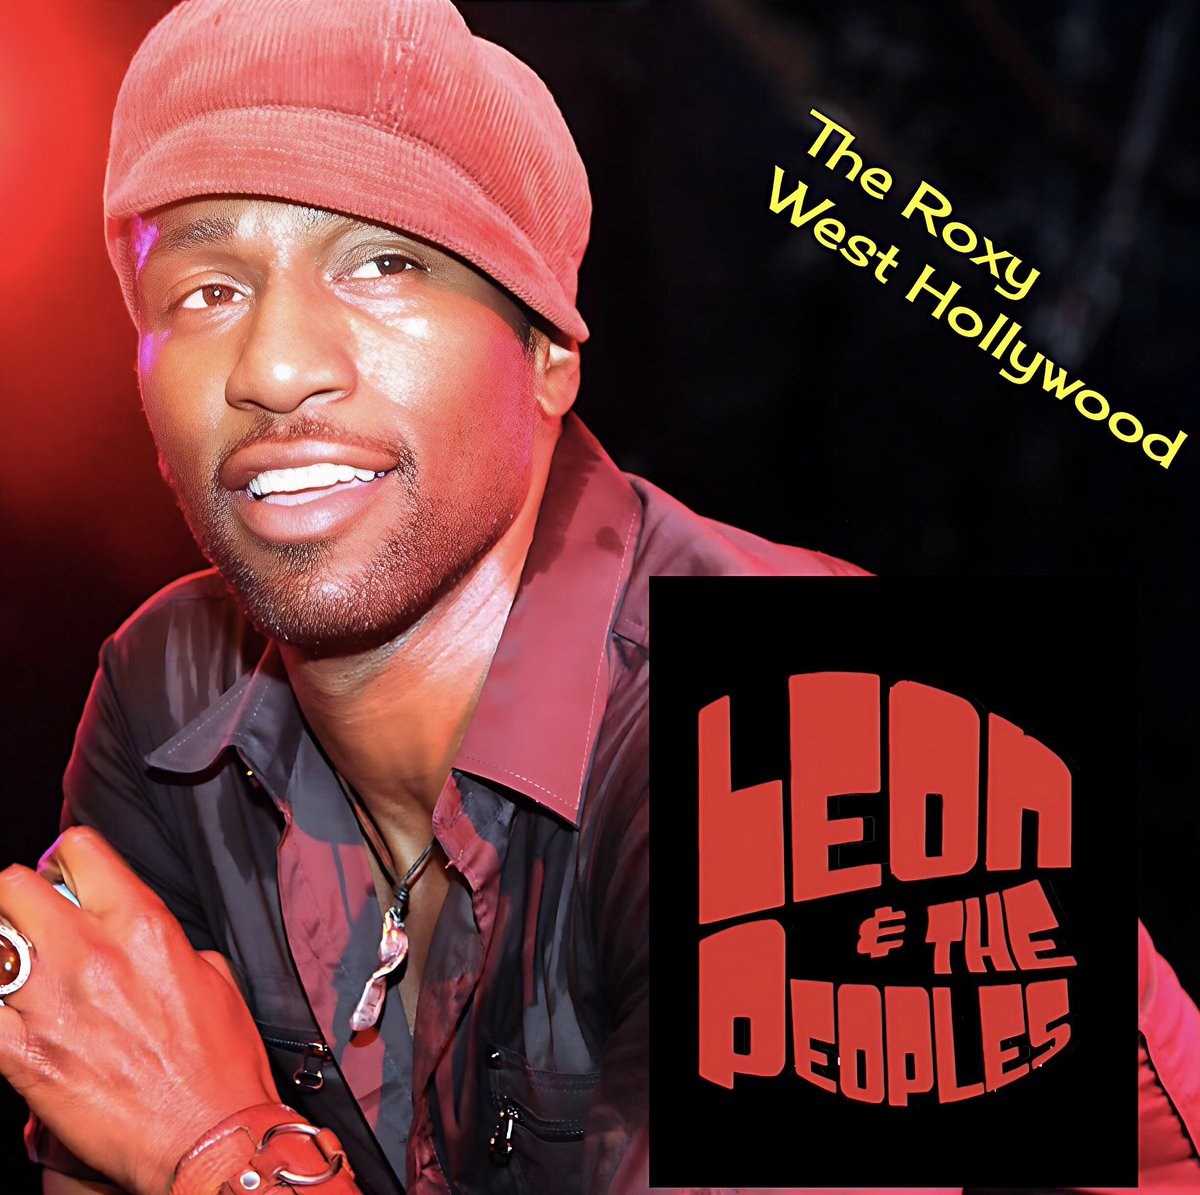 #tbthursday Were You There???? We Were (:! #LeonandThePeoples LIVE @theroxy w/ the legendary @thirdworldband Oh What a Night! #memories